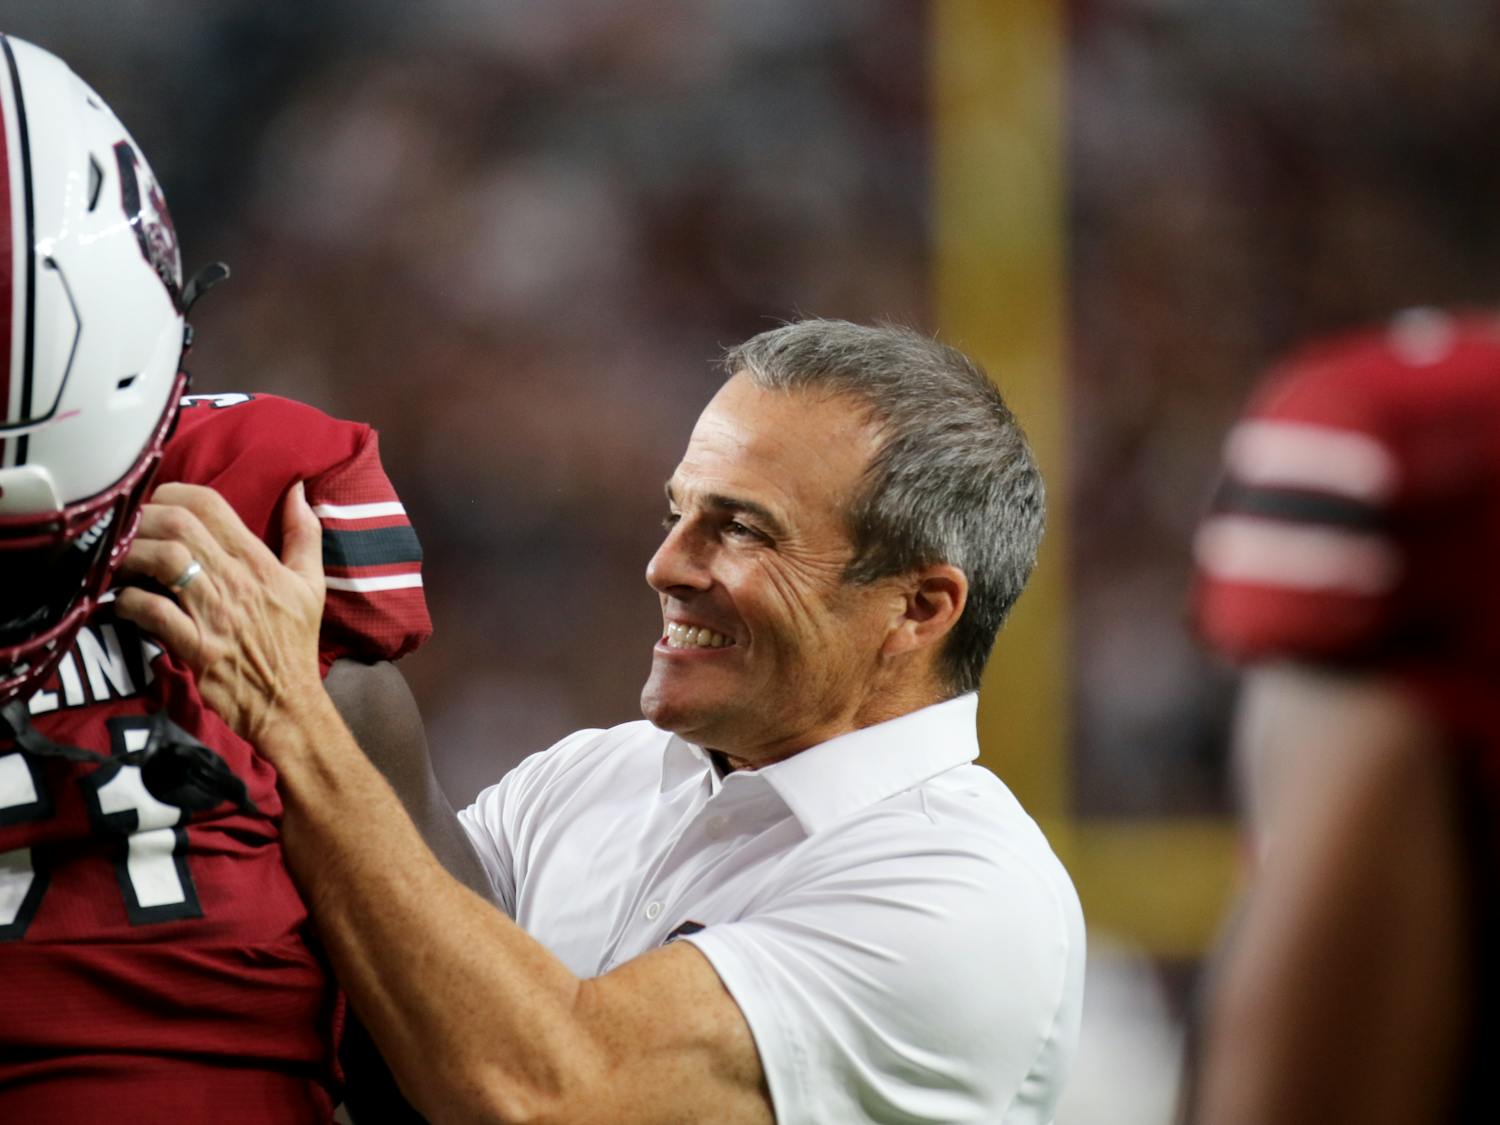 South Carolina head coach Shane Beamer interacts with freshman offensive lineman Tree Babalade after warming up for the game against Mississippi State on Sept. 23, 2023. The true freshman has appeared in multiple games and won True Freshman of the Week after he played in the game against Georgia.